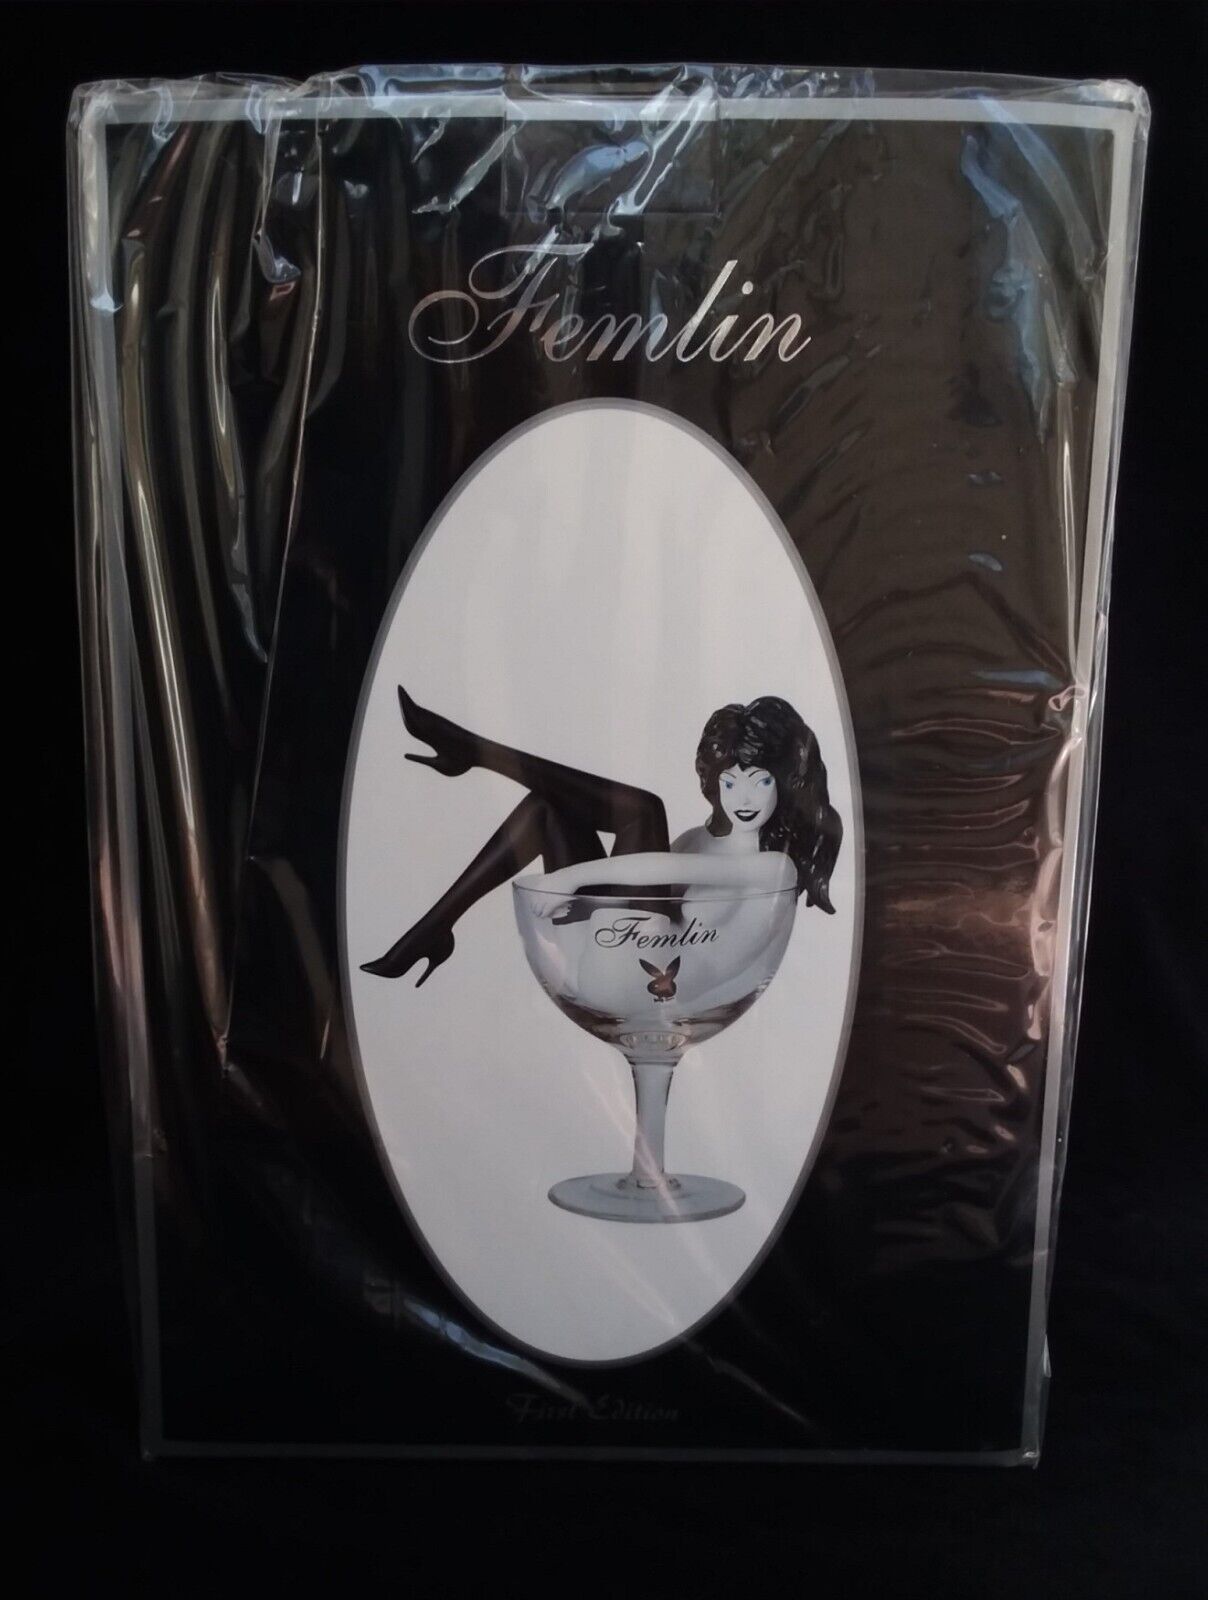 Playboy 2002 First Edition FEMLIN IN CHAMPAGNE GLASS, Brand New in Box